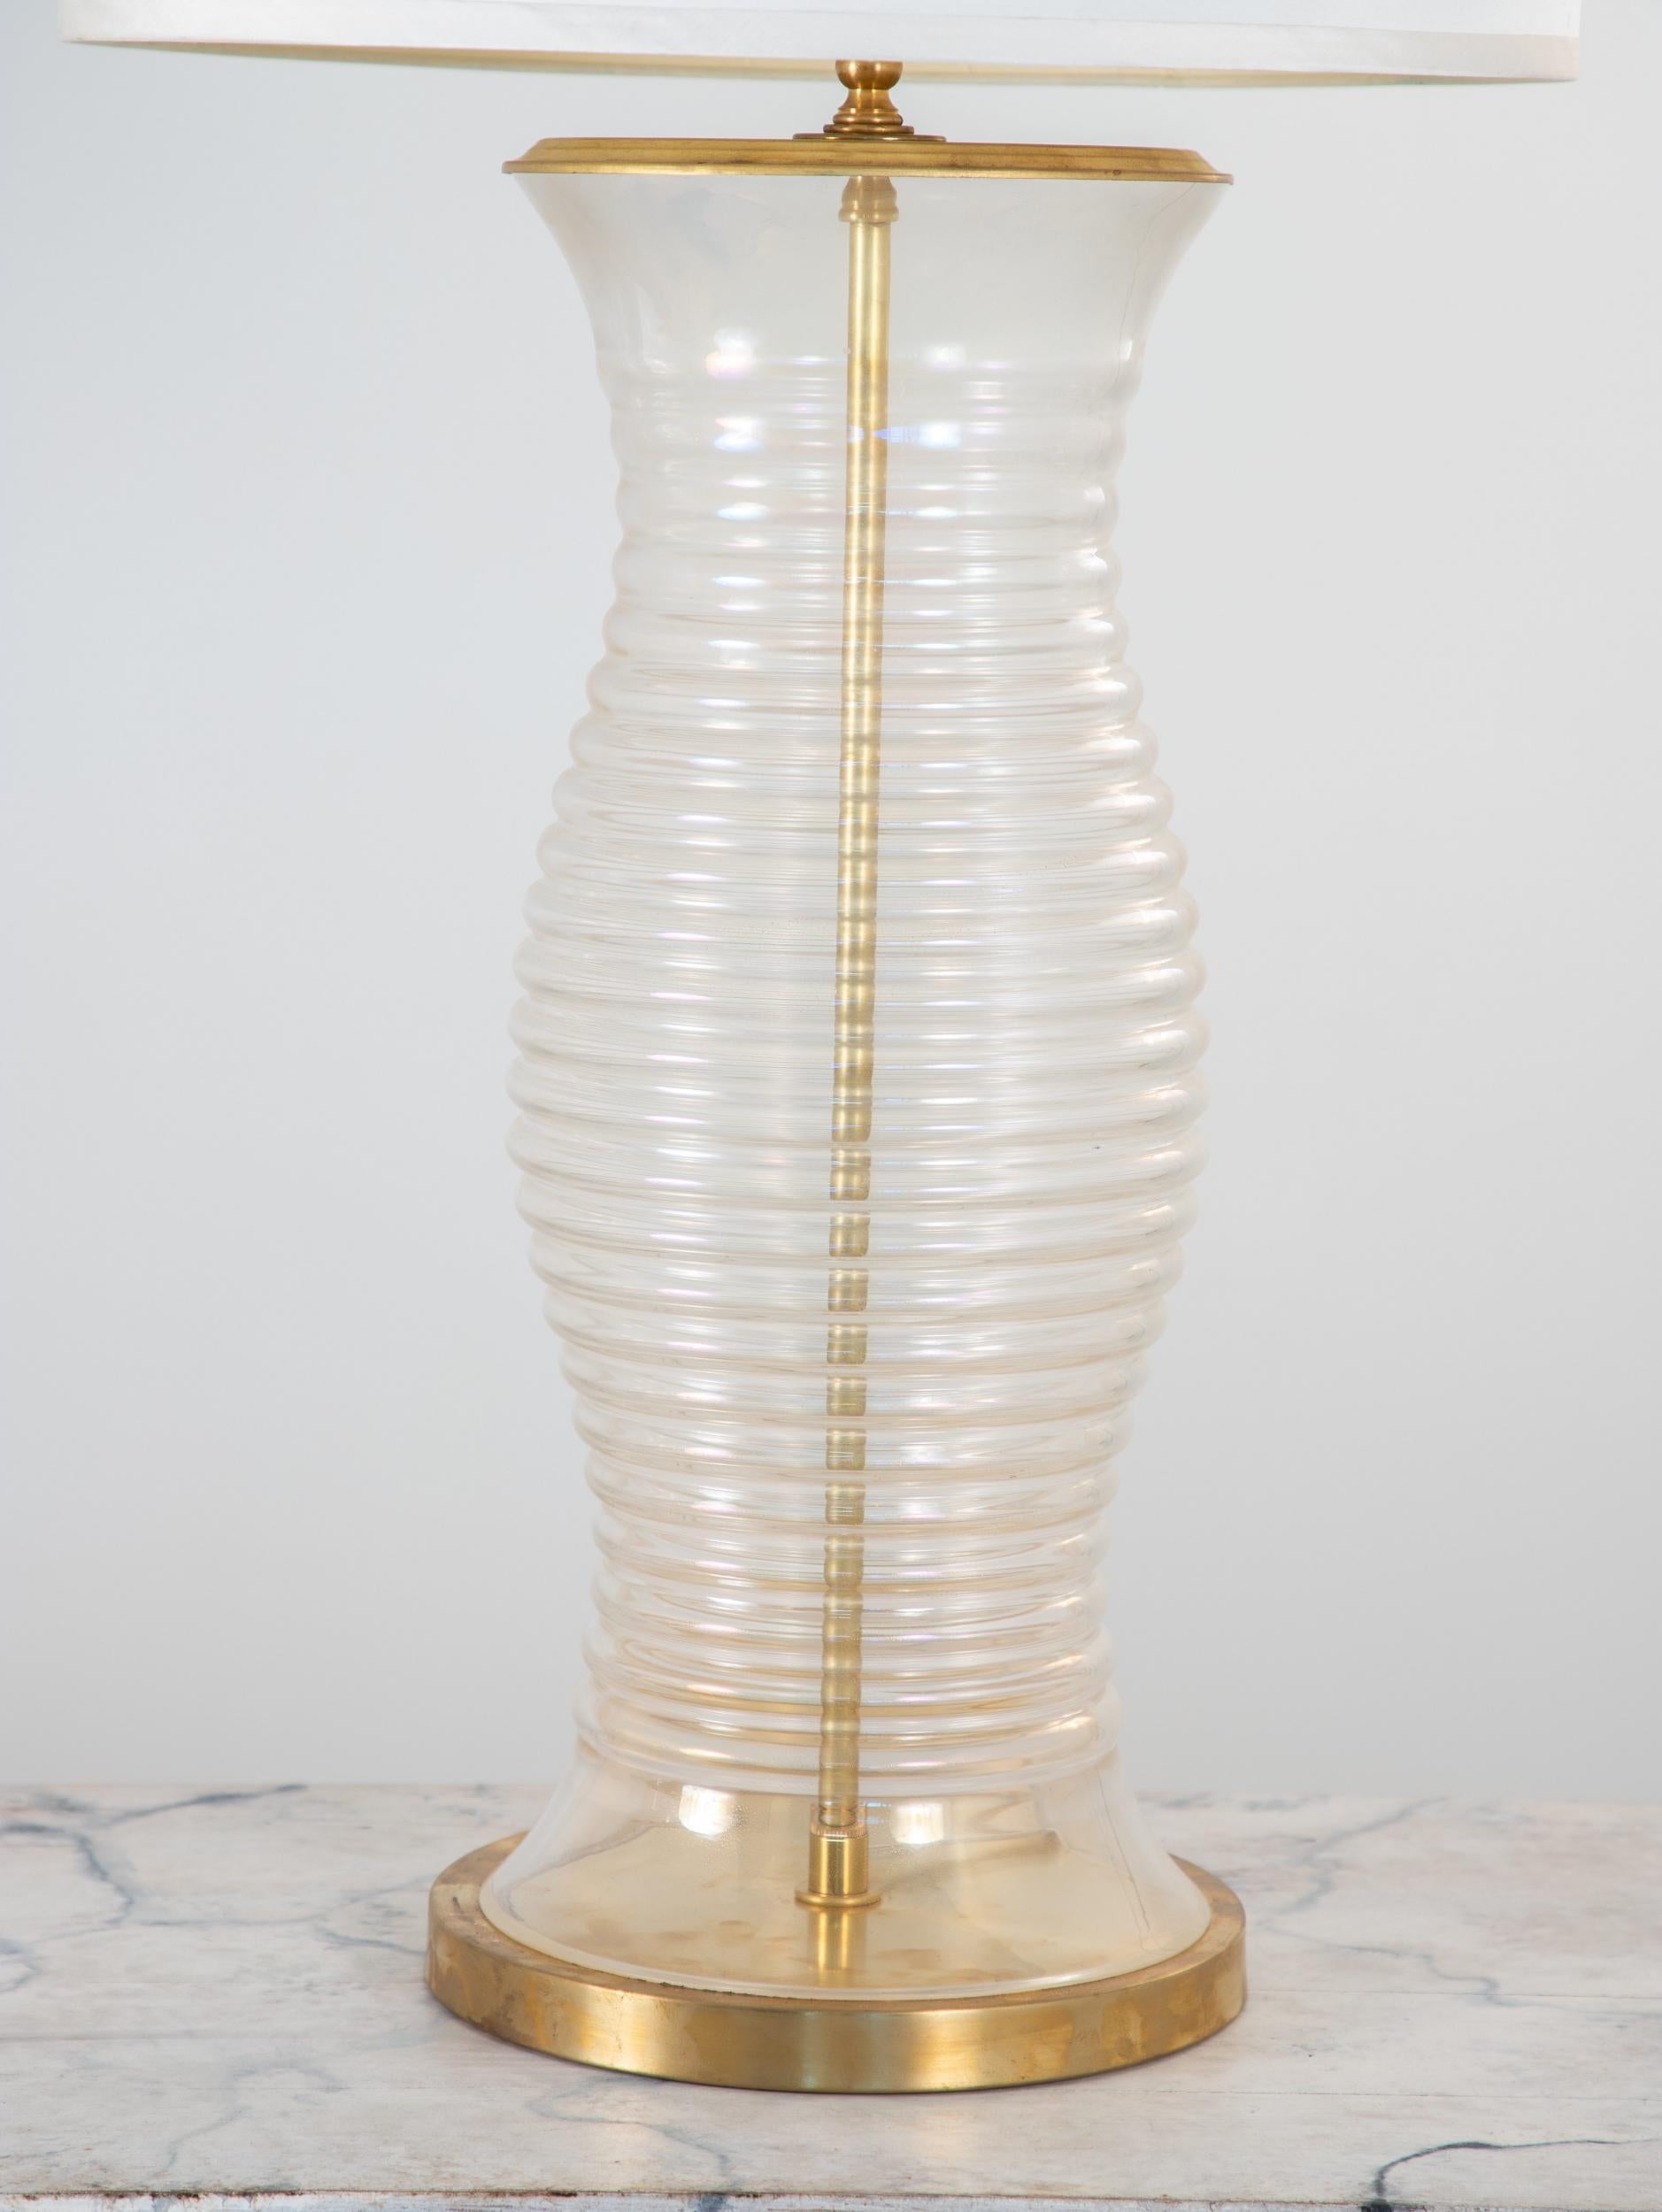 An oversized Murano opalescent glass lamp. A brass base and rod complement the golden opalescent finish. Found in Murano, this piece has been rewired for American outlets. Shade and harp are not included.